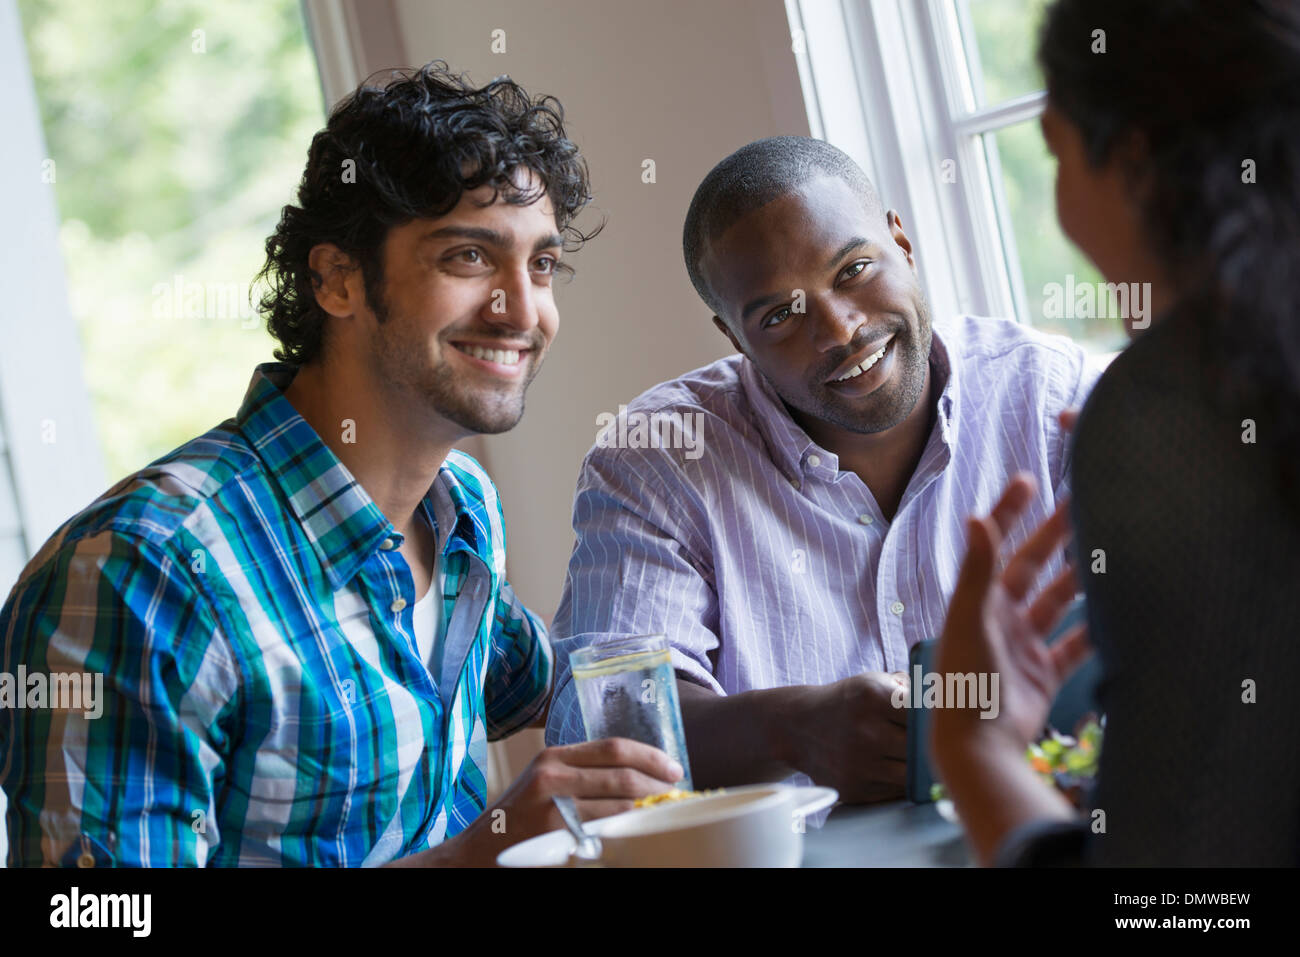 Three people seated at a table. Stock Photo